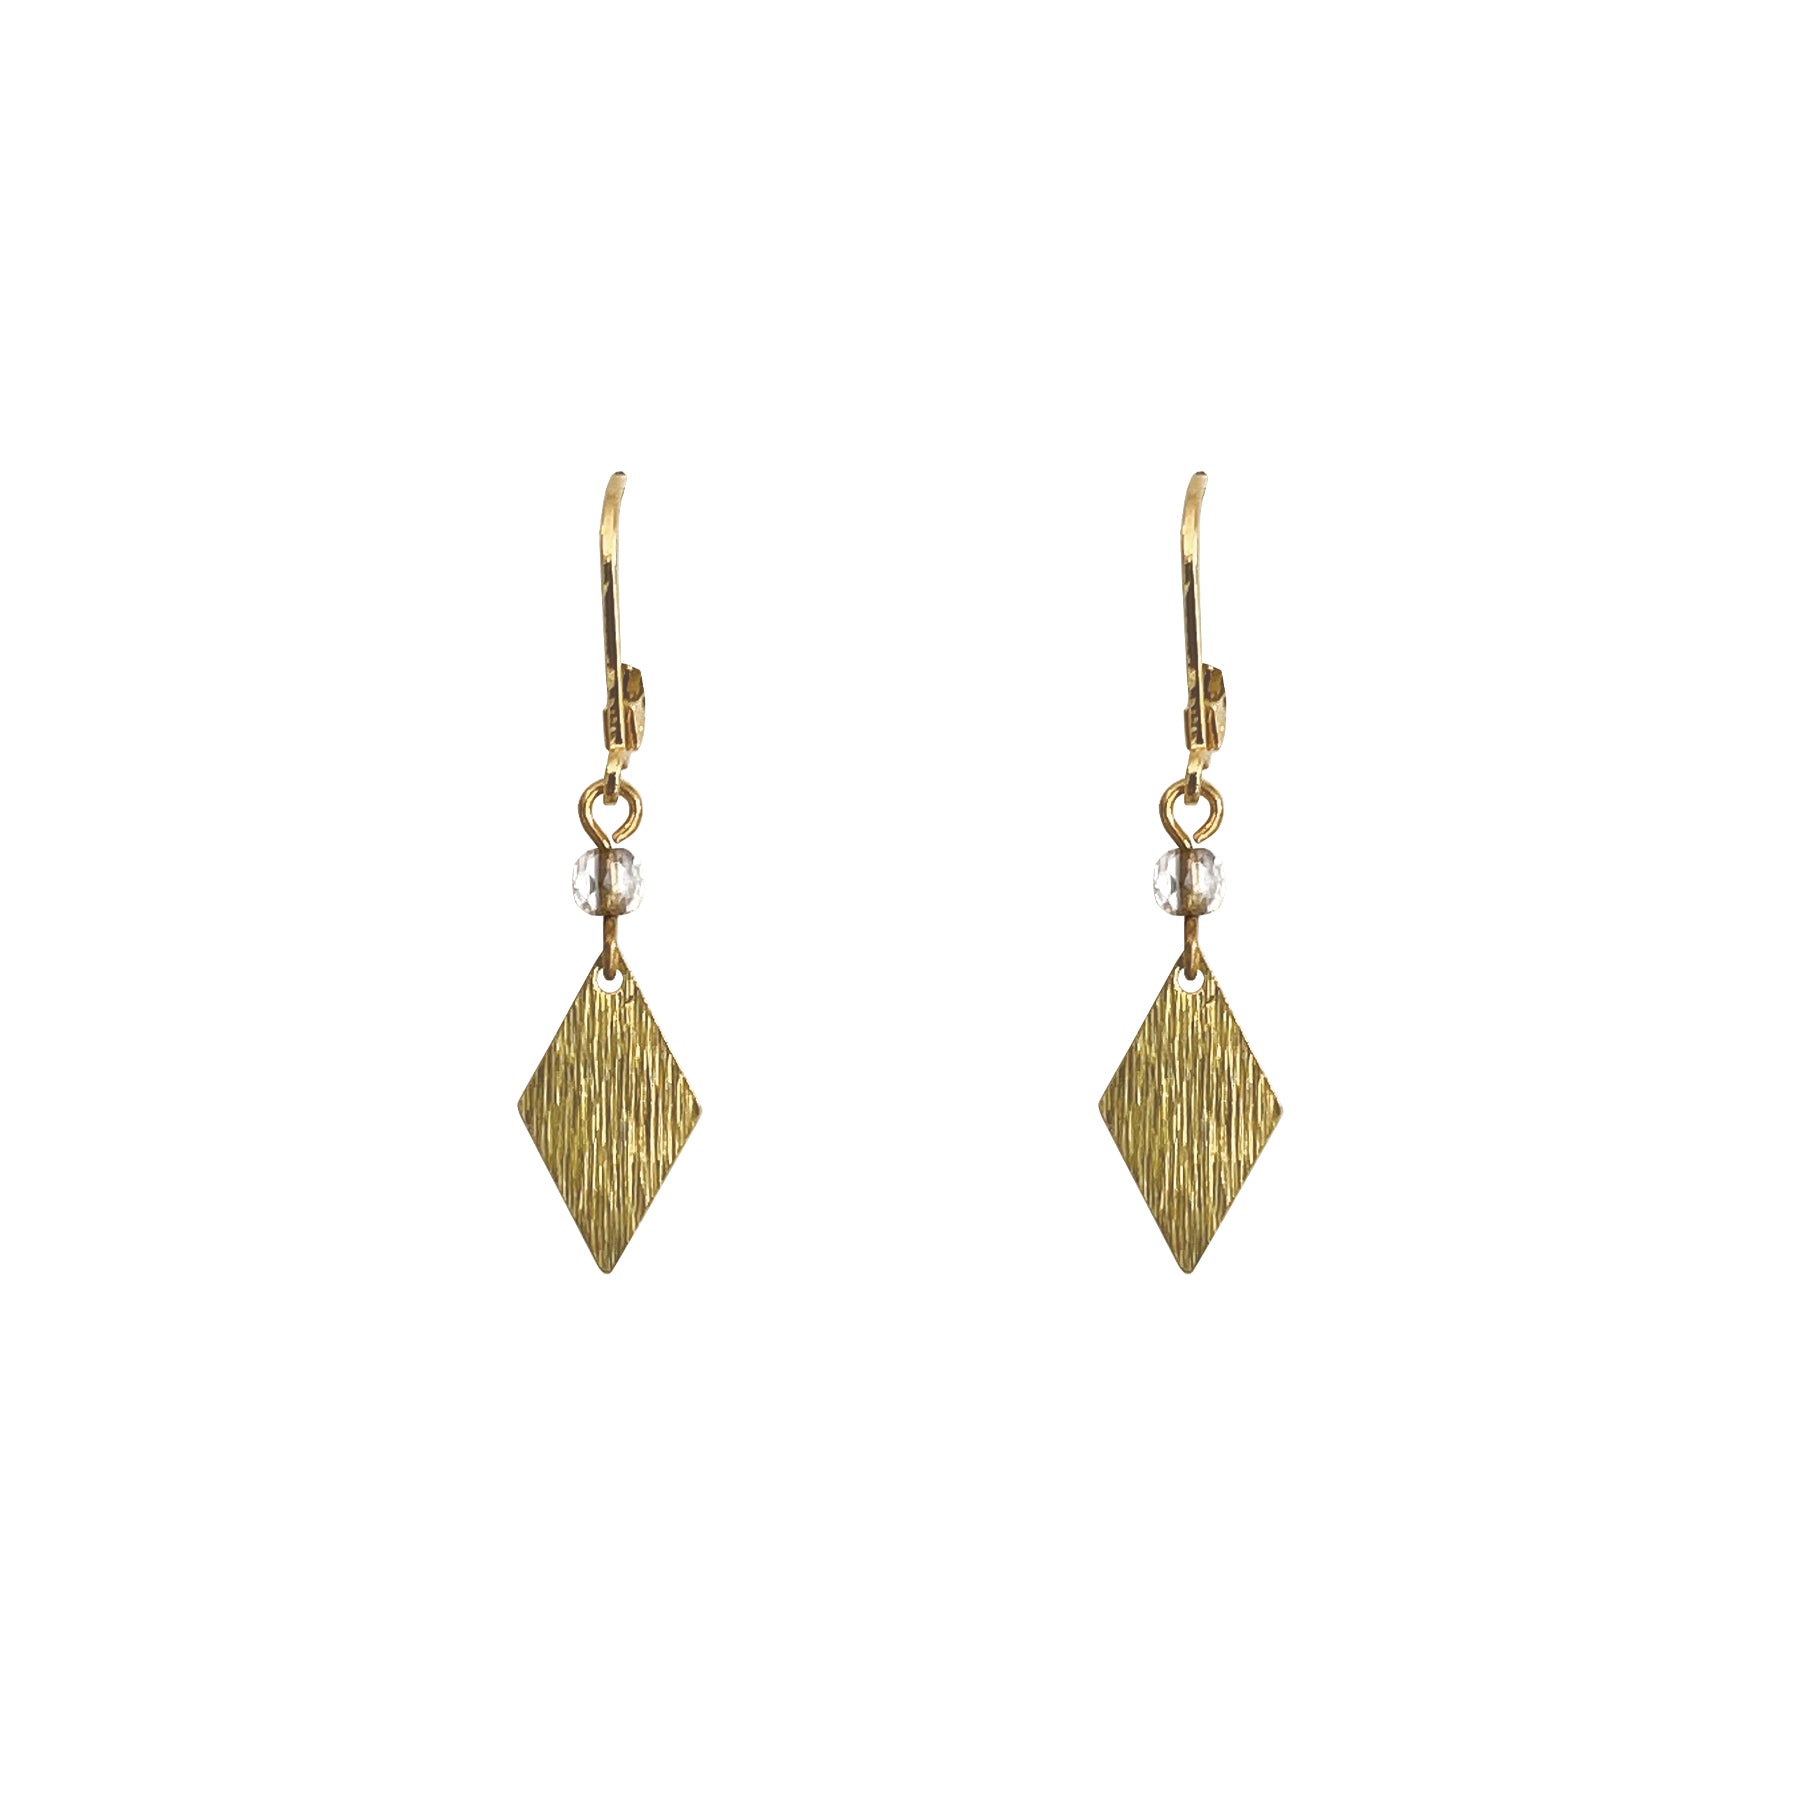  Gold diamond-shaped pendant earrings with crystal pearls 